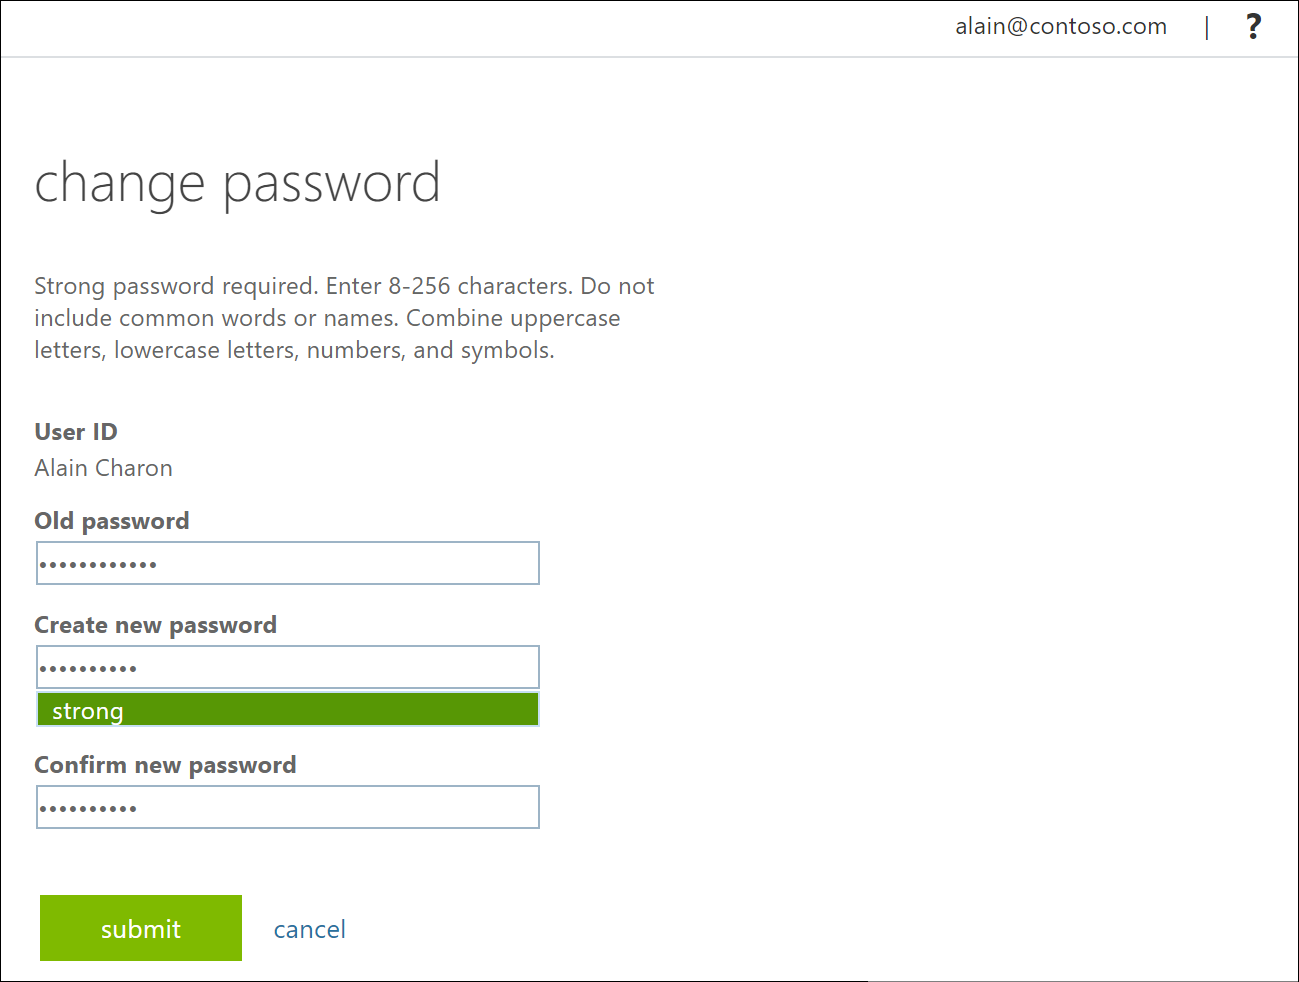 The Change password page, showing password fields